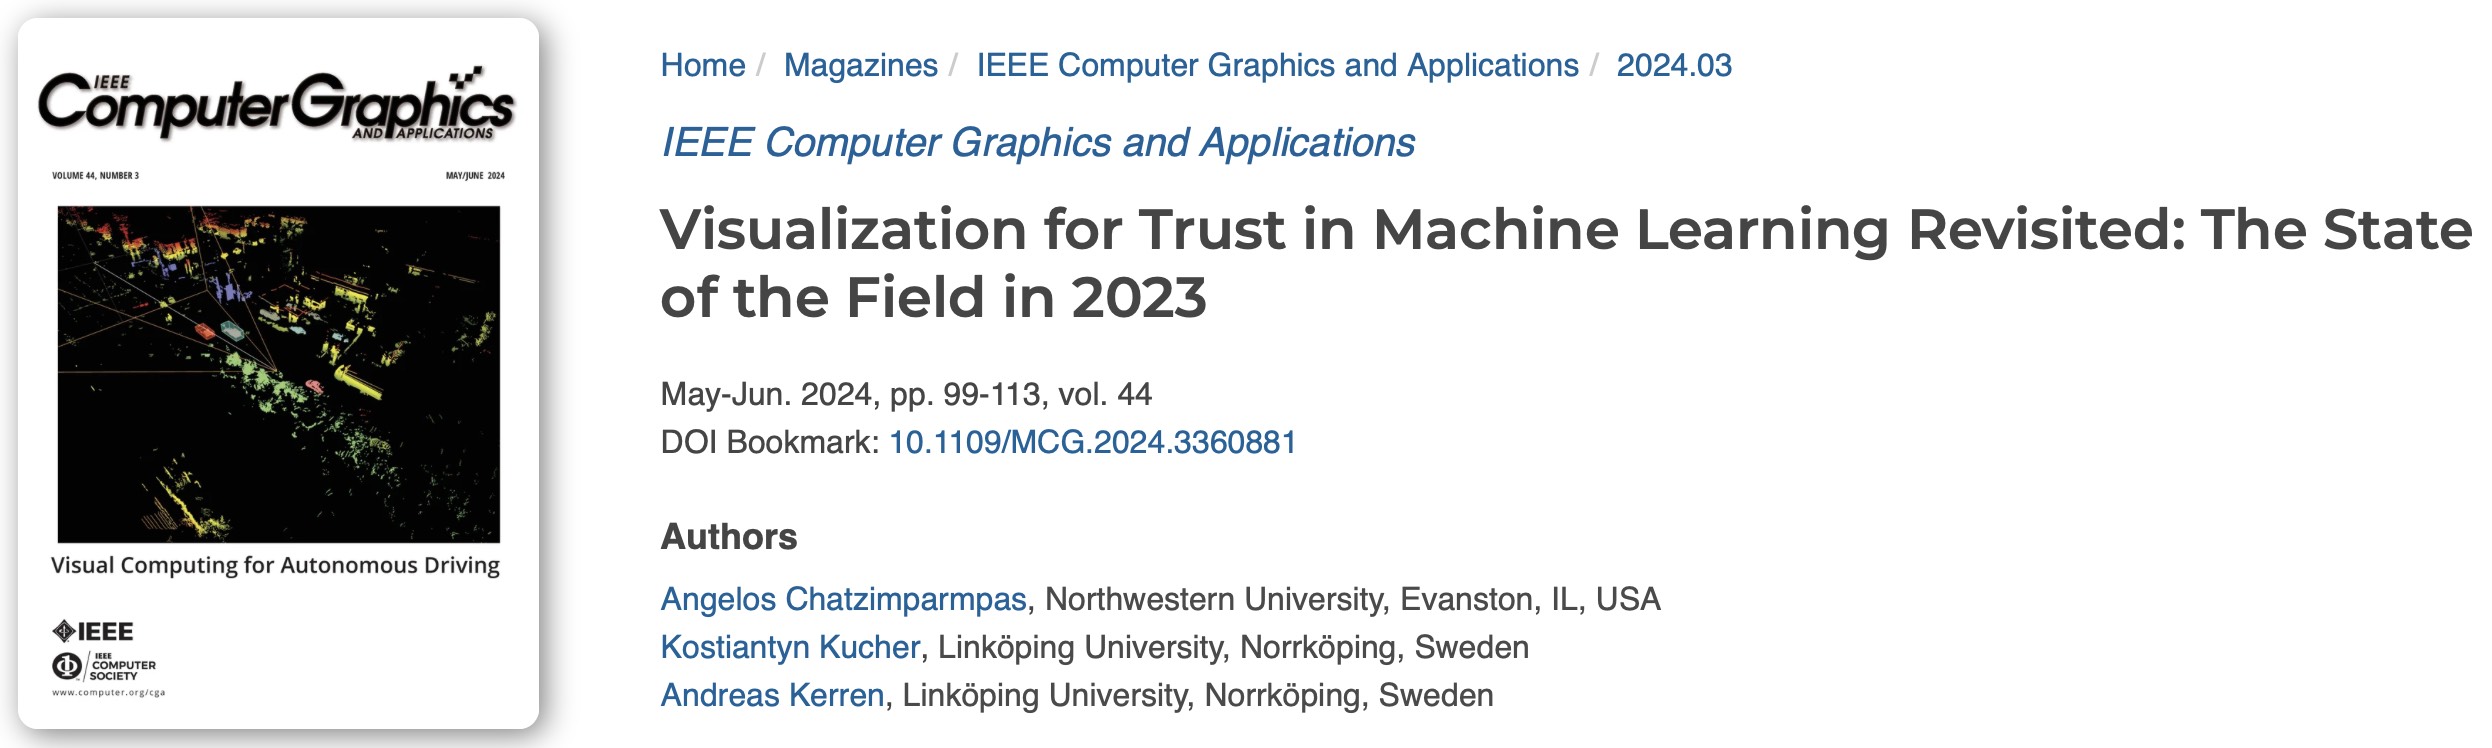 Featured Article in the May/June 2024 issue of IEEE CG&A